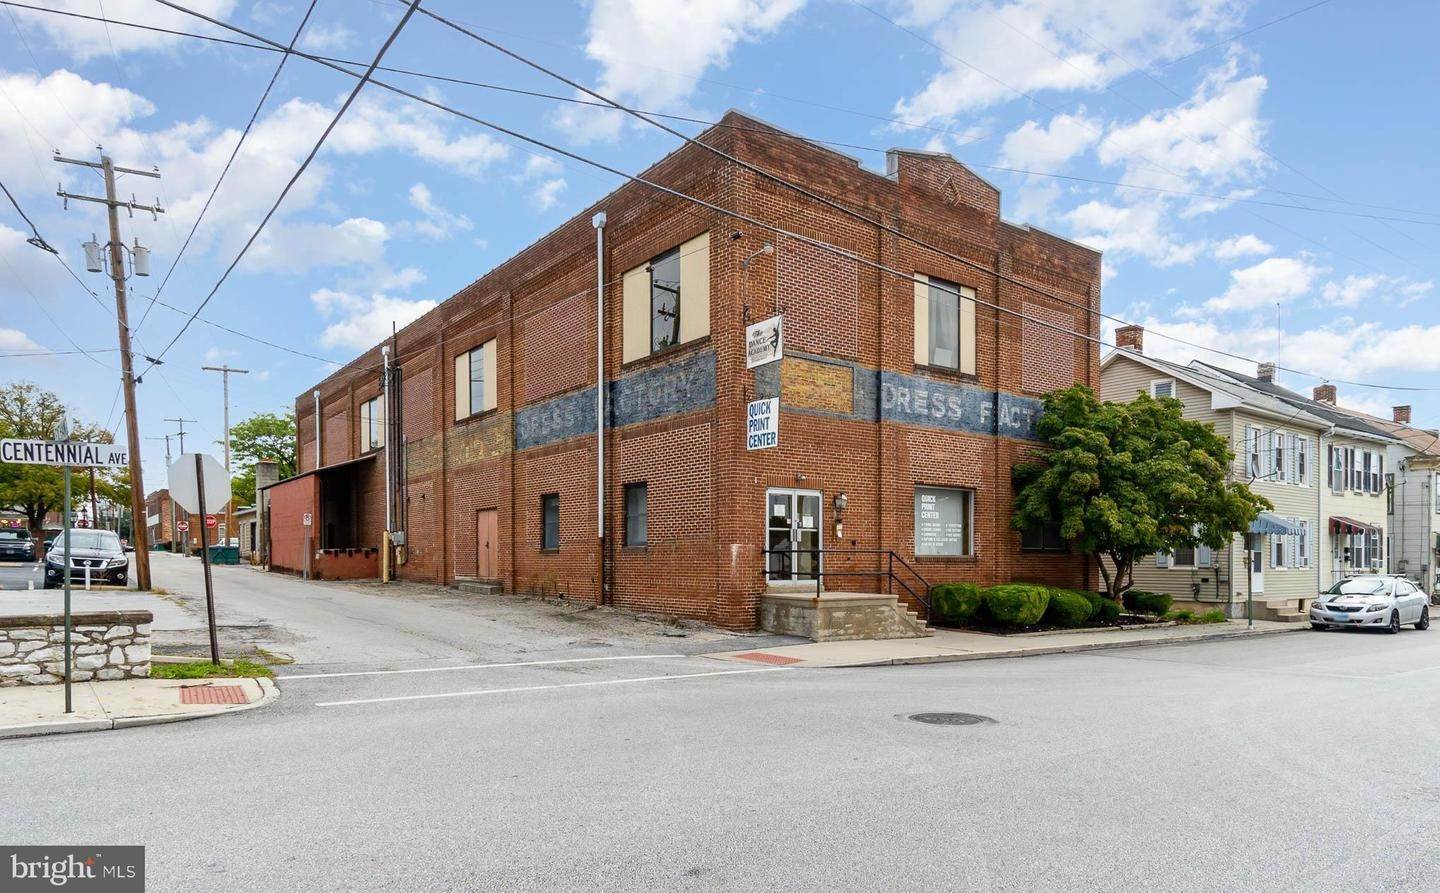 Commercial for Sale at 18 CENTENNIAL Avenue Hanover, Pennsylvania 17331 United States